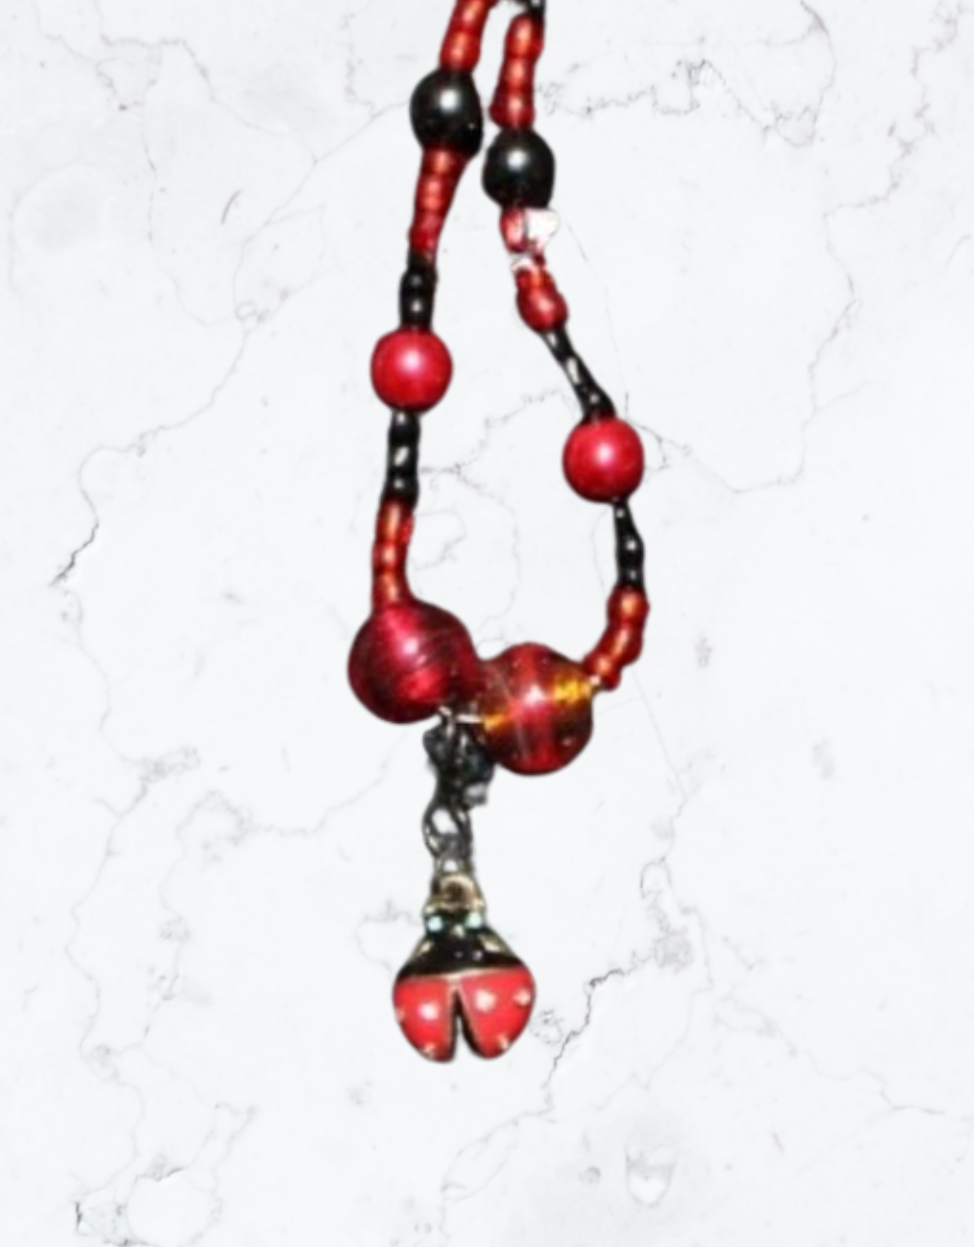 Red and Black Ladybug Pendant Bead Necklace